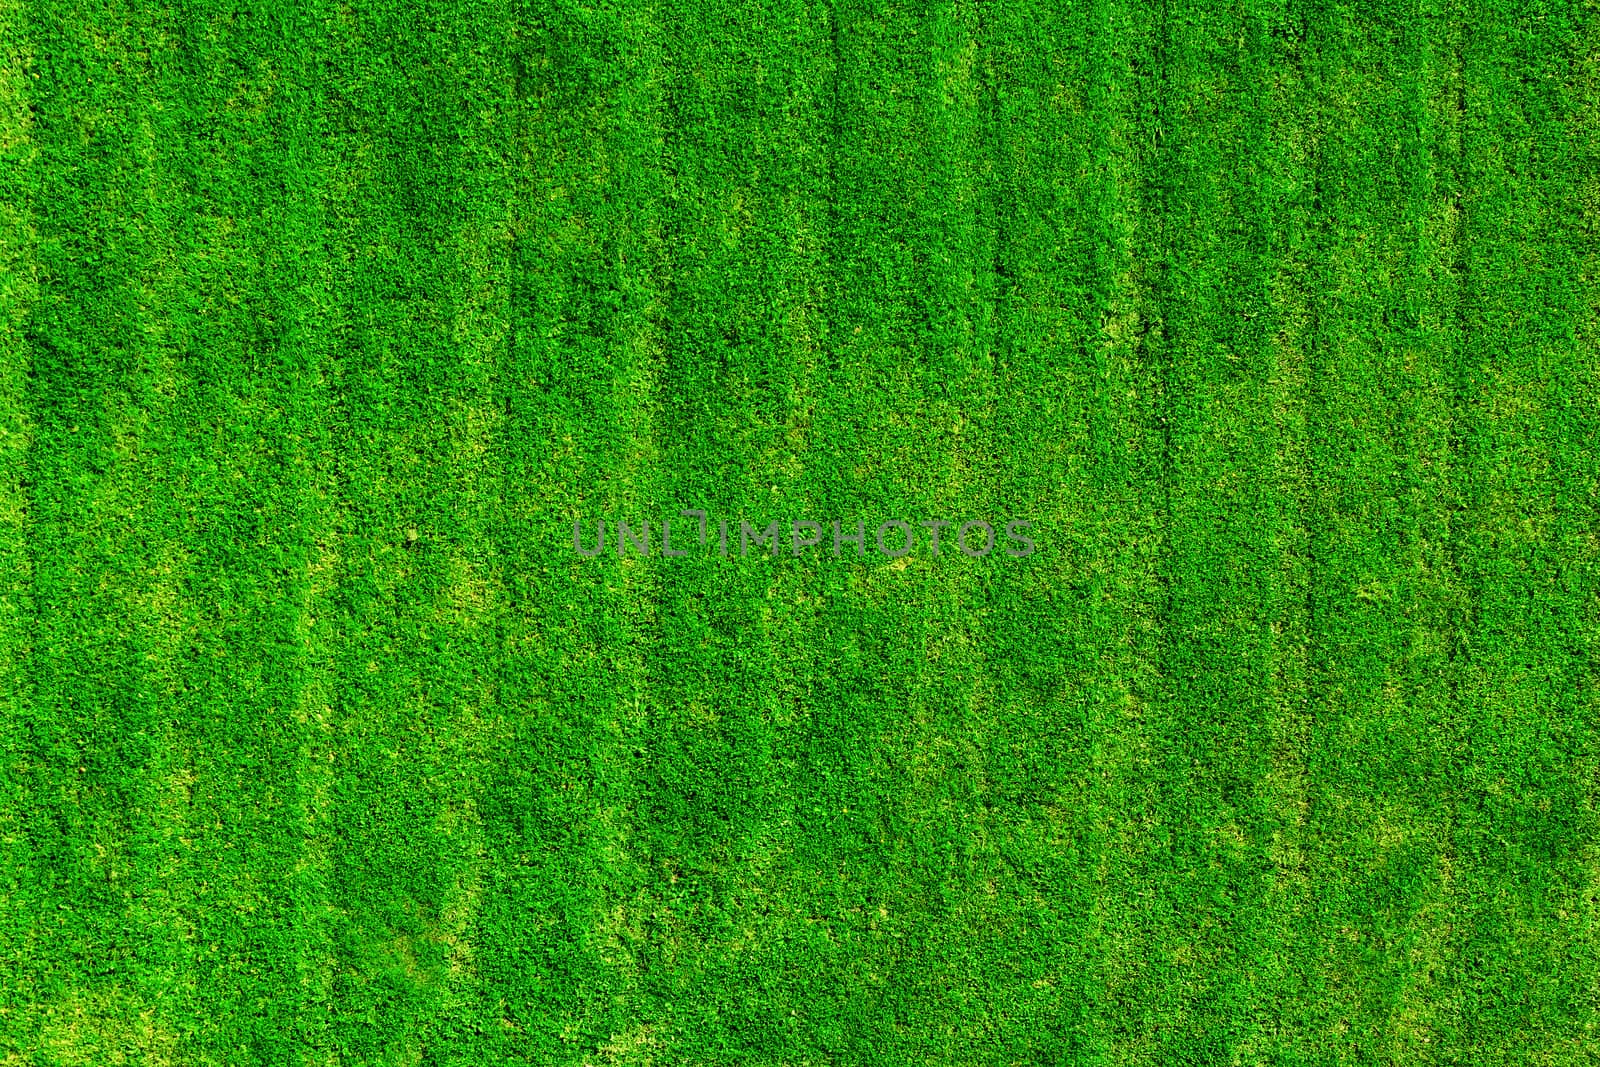 Green grass field background by SNR